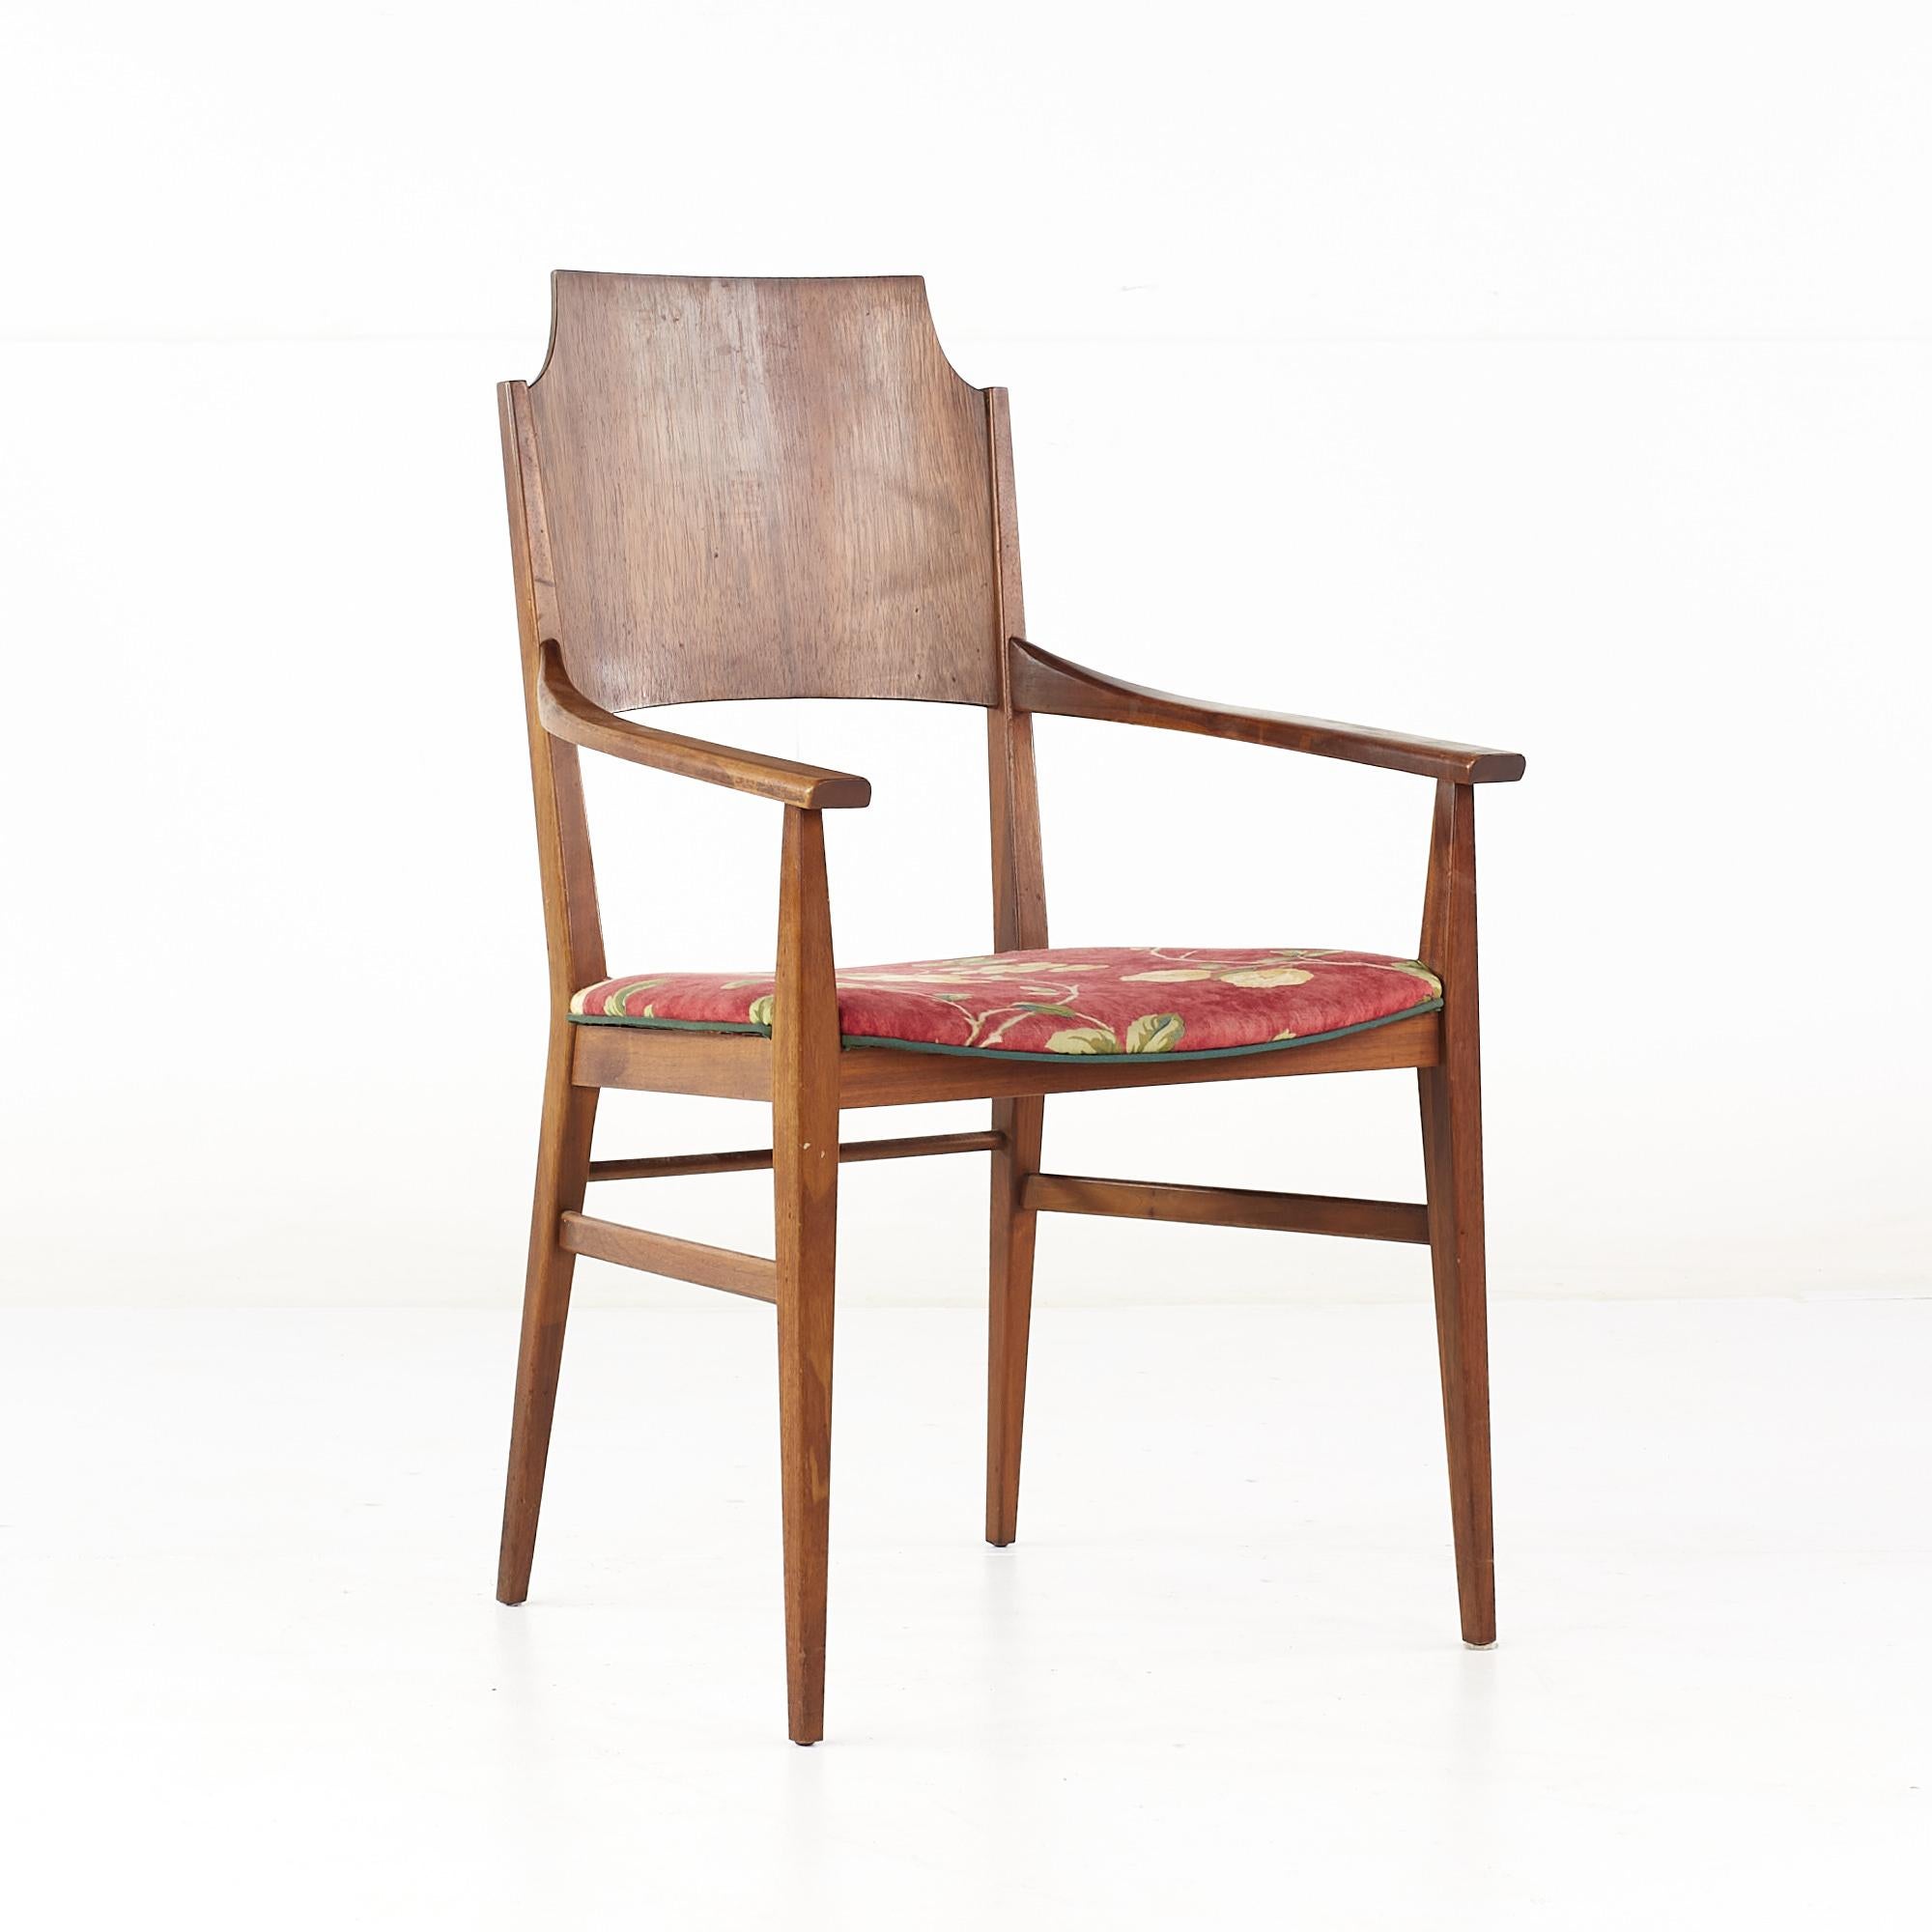 Paul McCobb for Lane Delineator Mid Century Rosewood Dining Chairs - Set of 8 For Sale 4